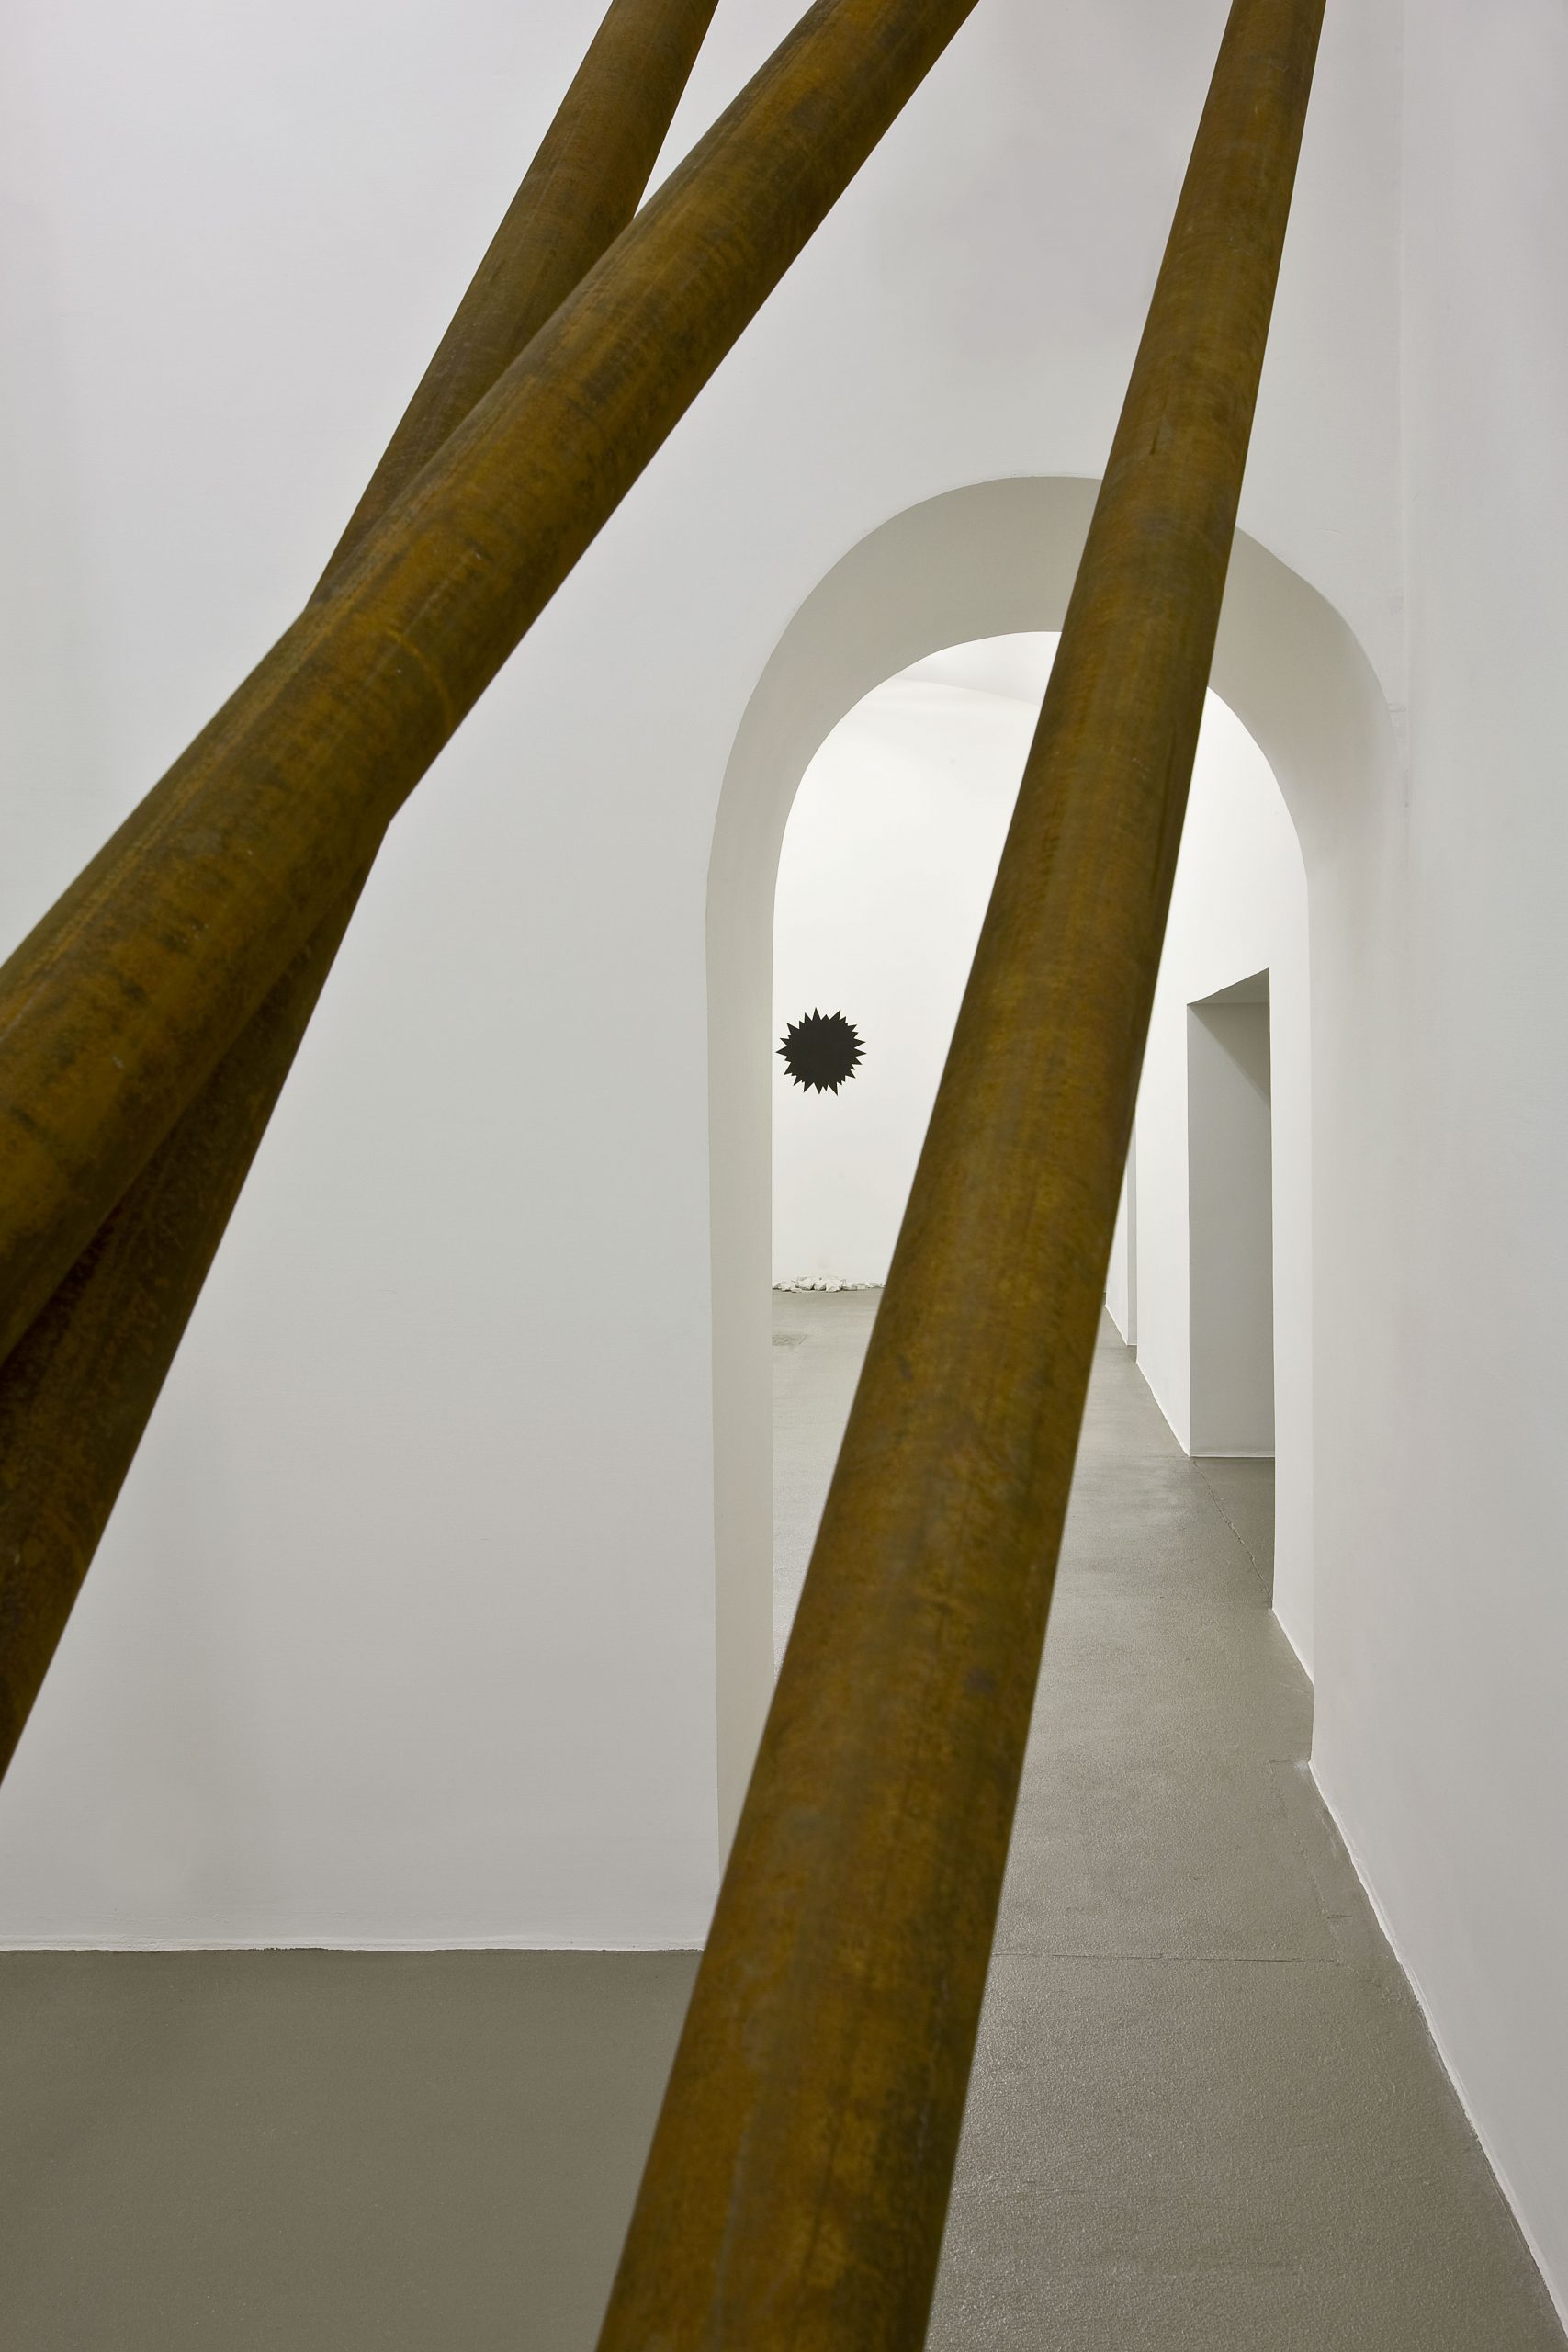 Mutiny Seemed a Probability. Installation view at Fondazione Giuliani, photo by Claudio Abate